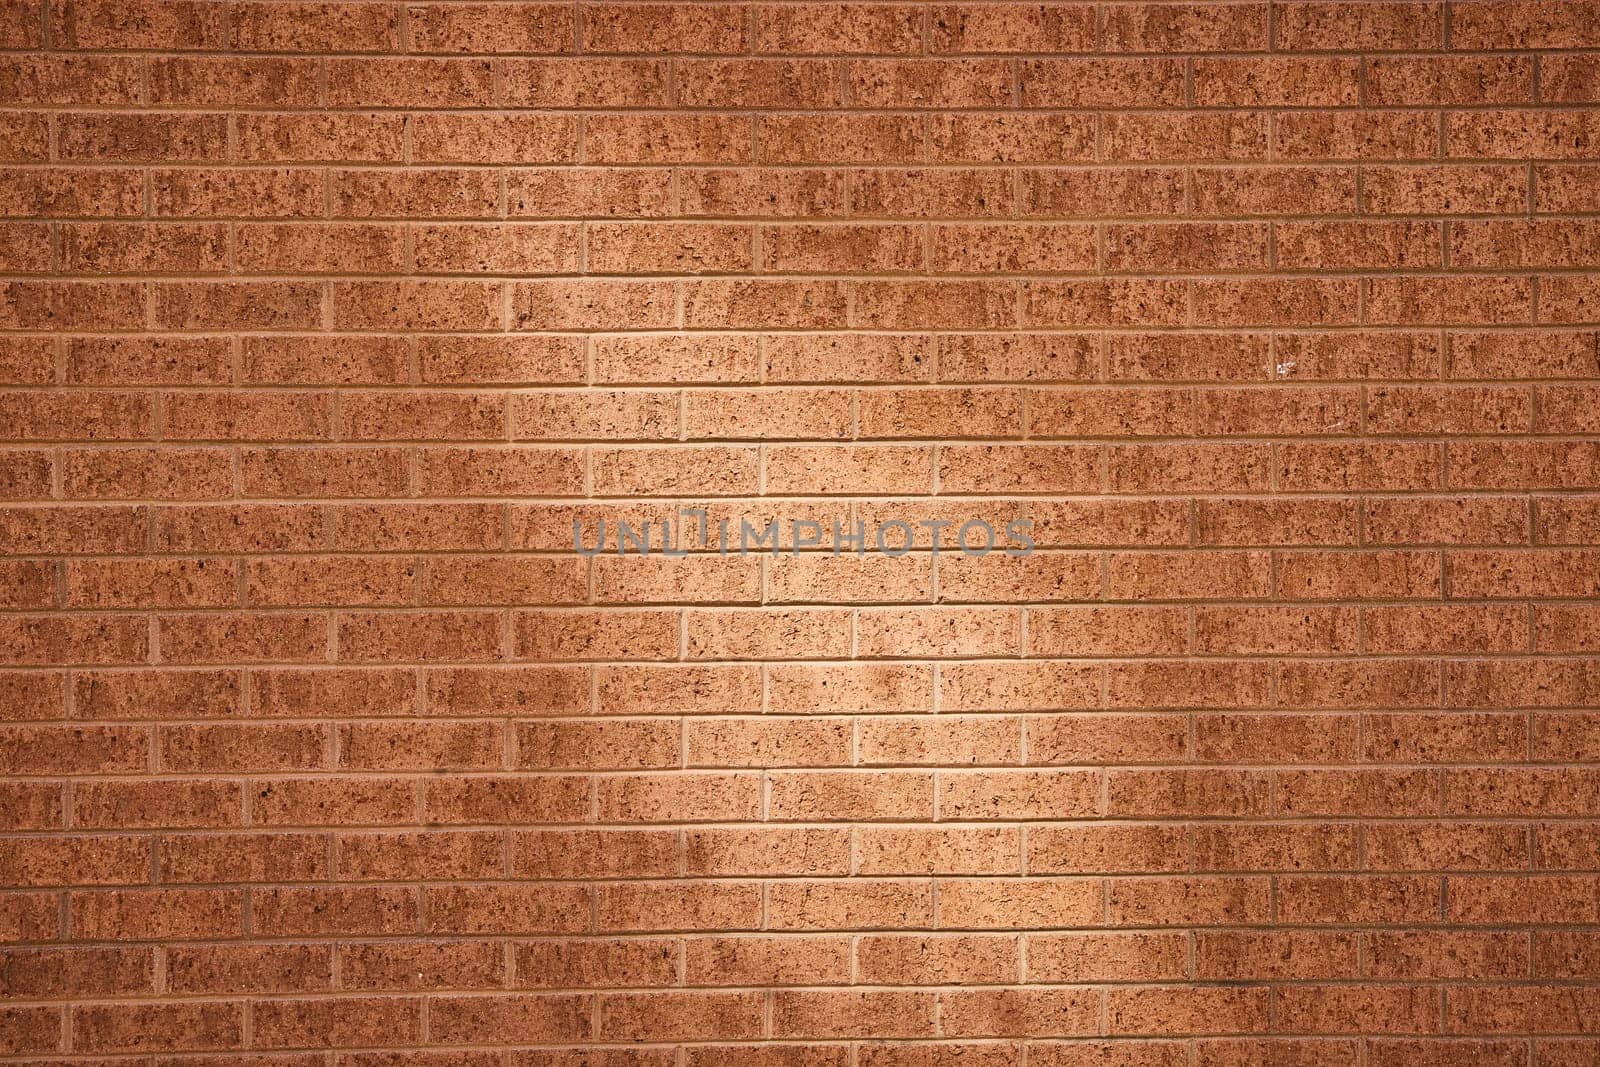 Warm, textured brick wall in downtown Fort Wayne, Indiana, perfect for architecture and design projects.